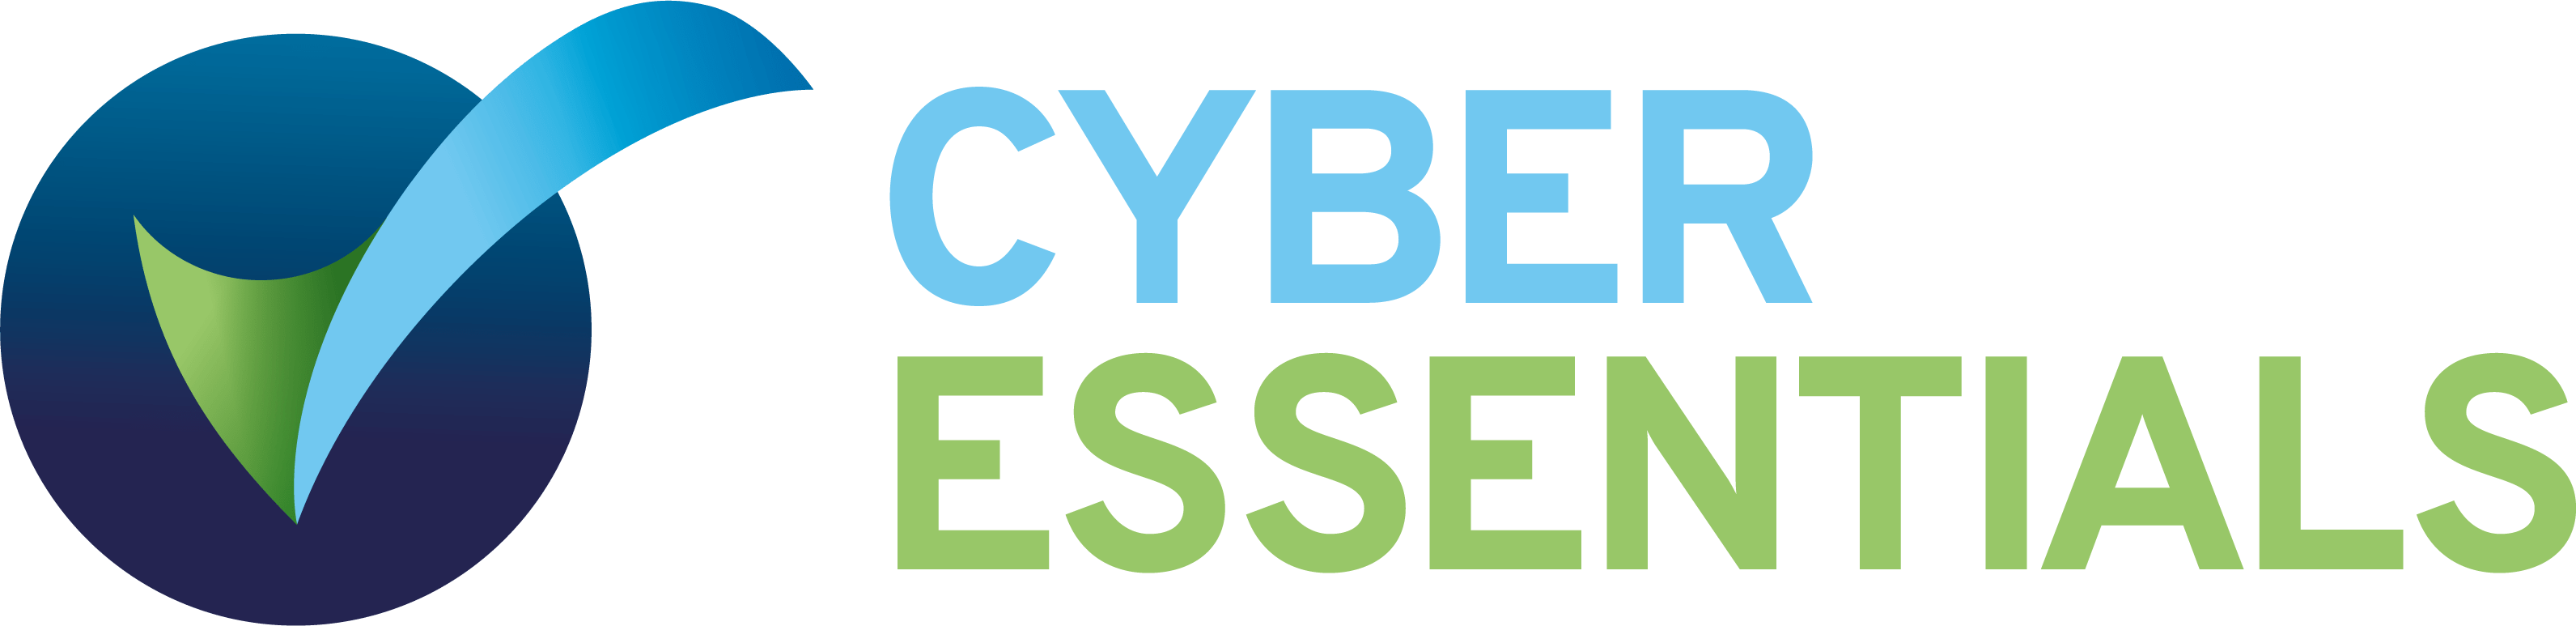 Blue and green cyber essentials logo